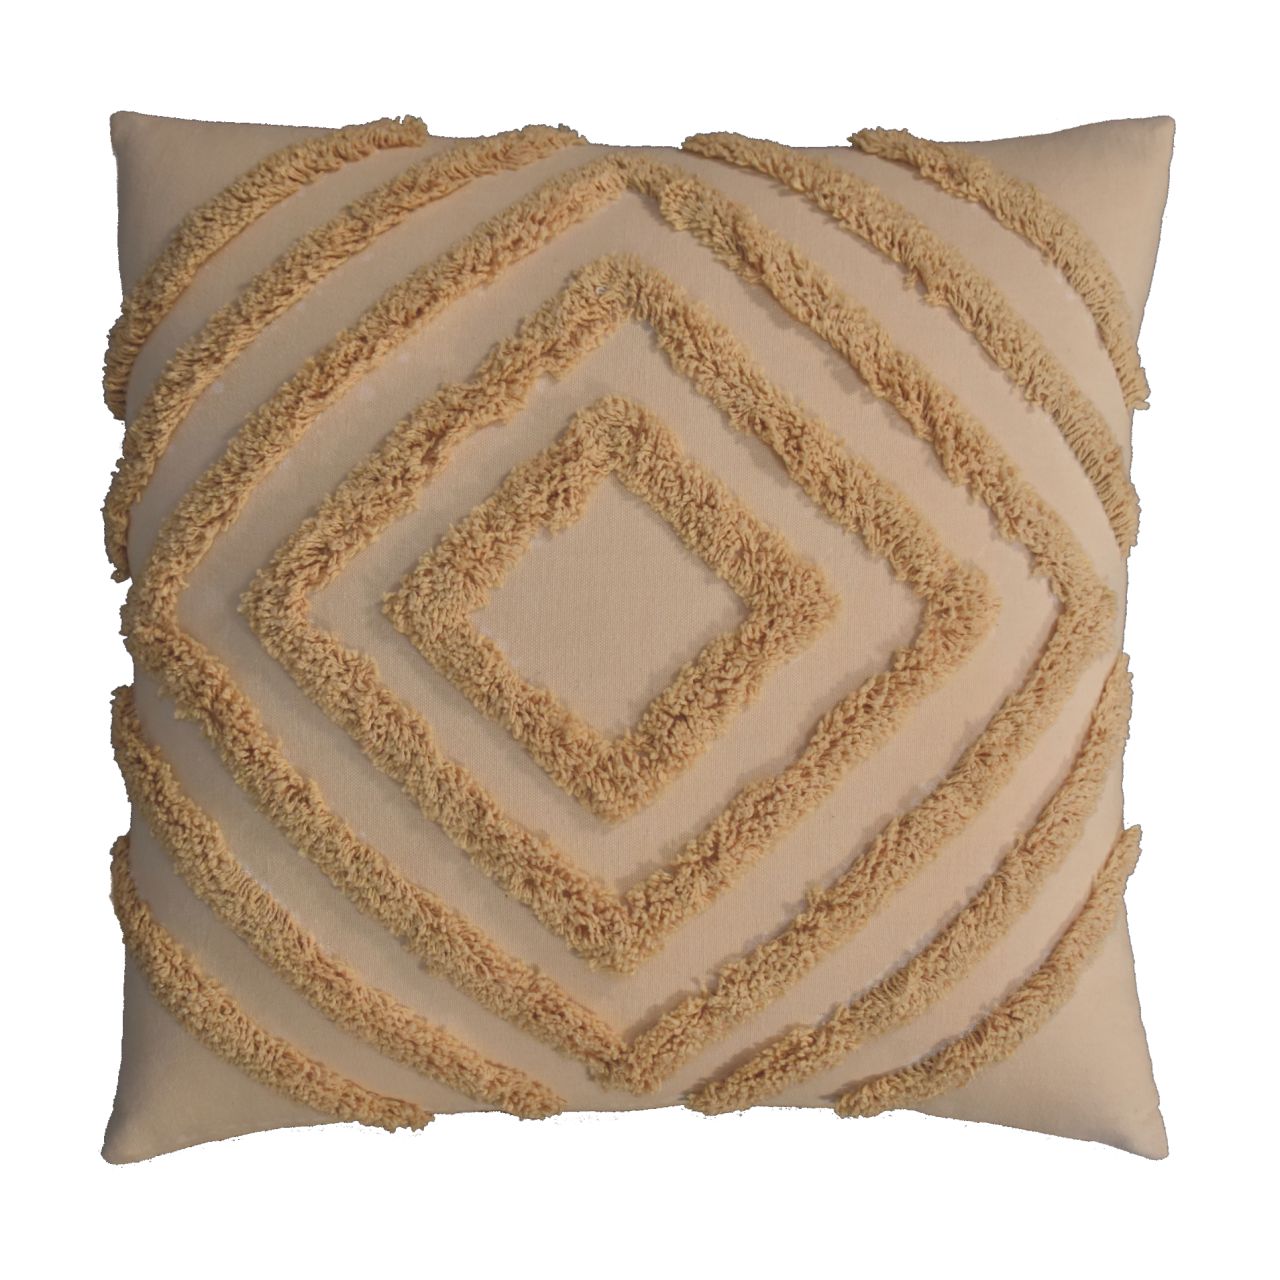 View Tacy Mustard Cushion Set of 2 information